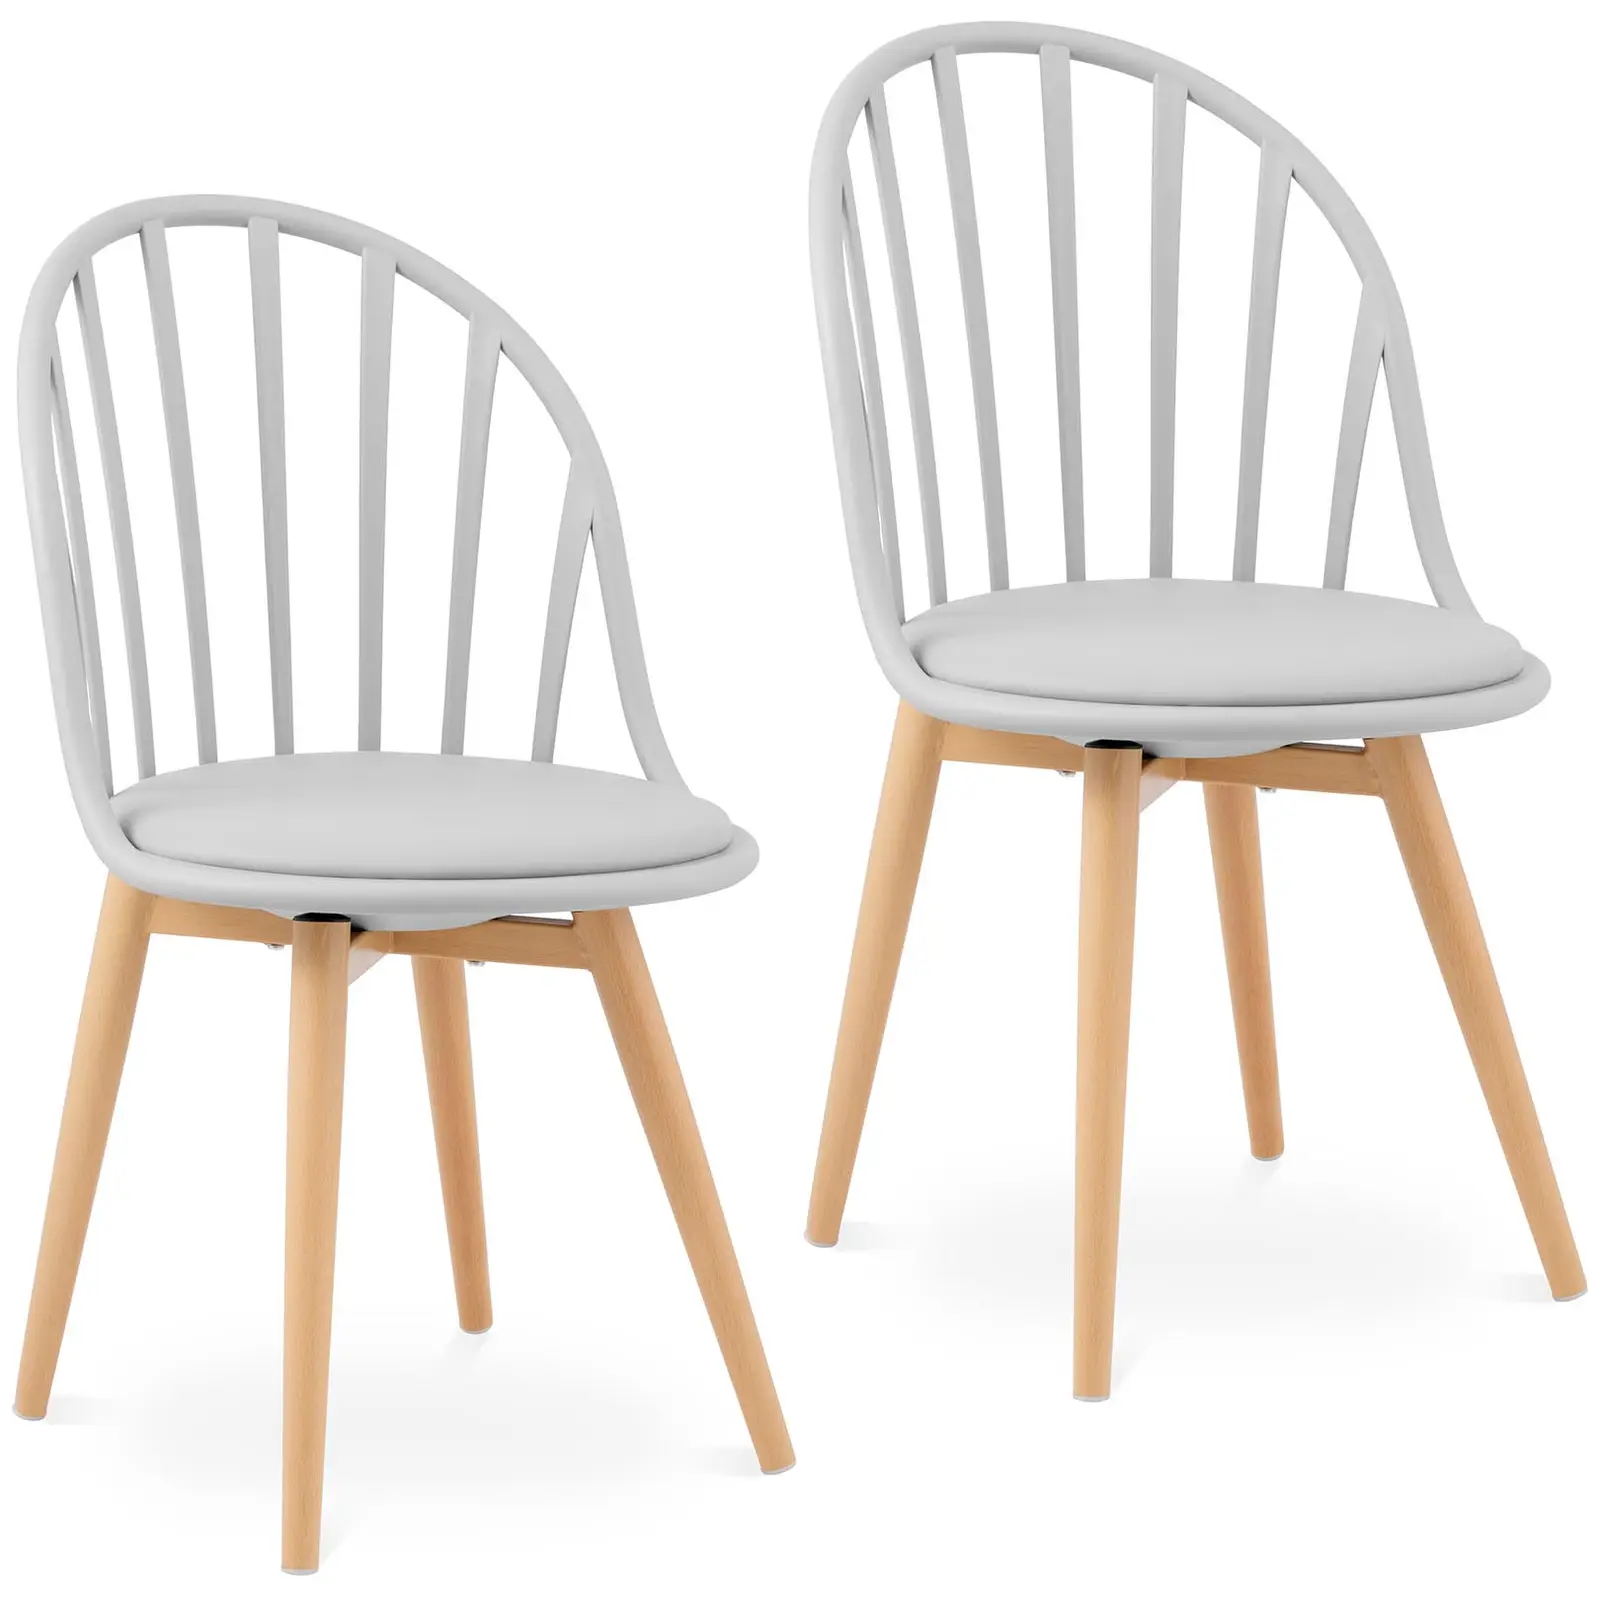 Chair - set of 2 - Royal Catering - up to 150 kg - open backrest - white